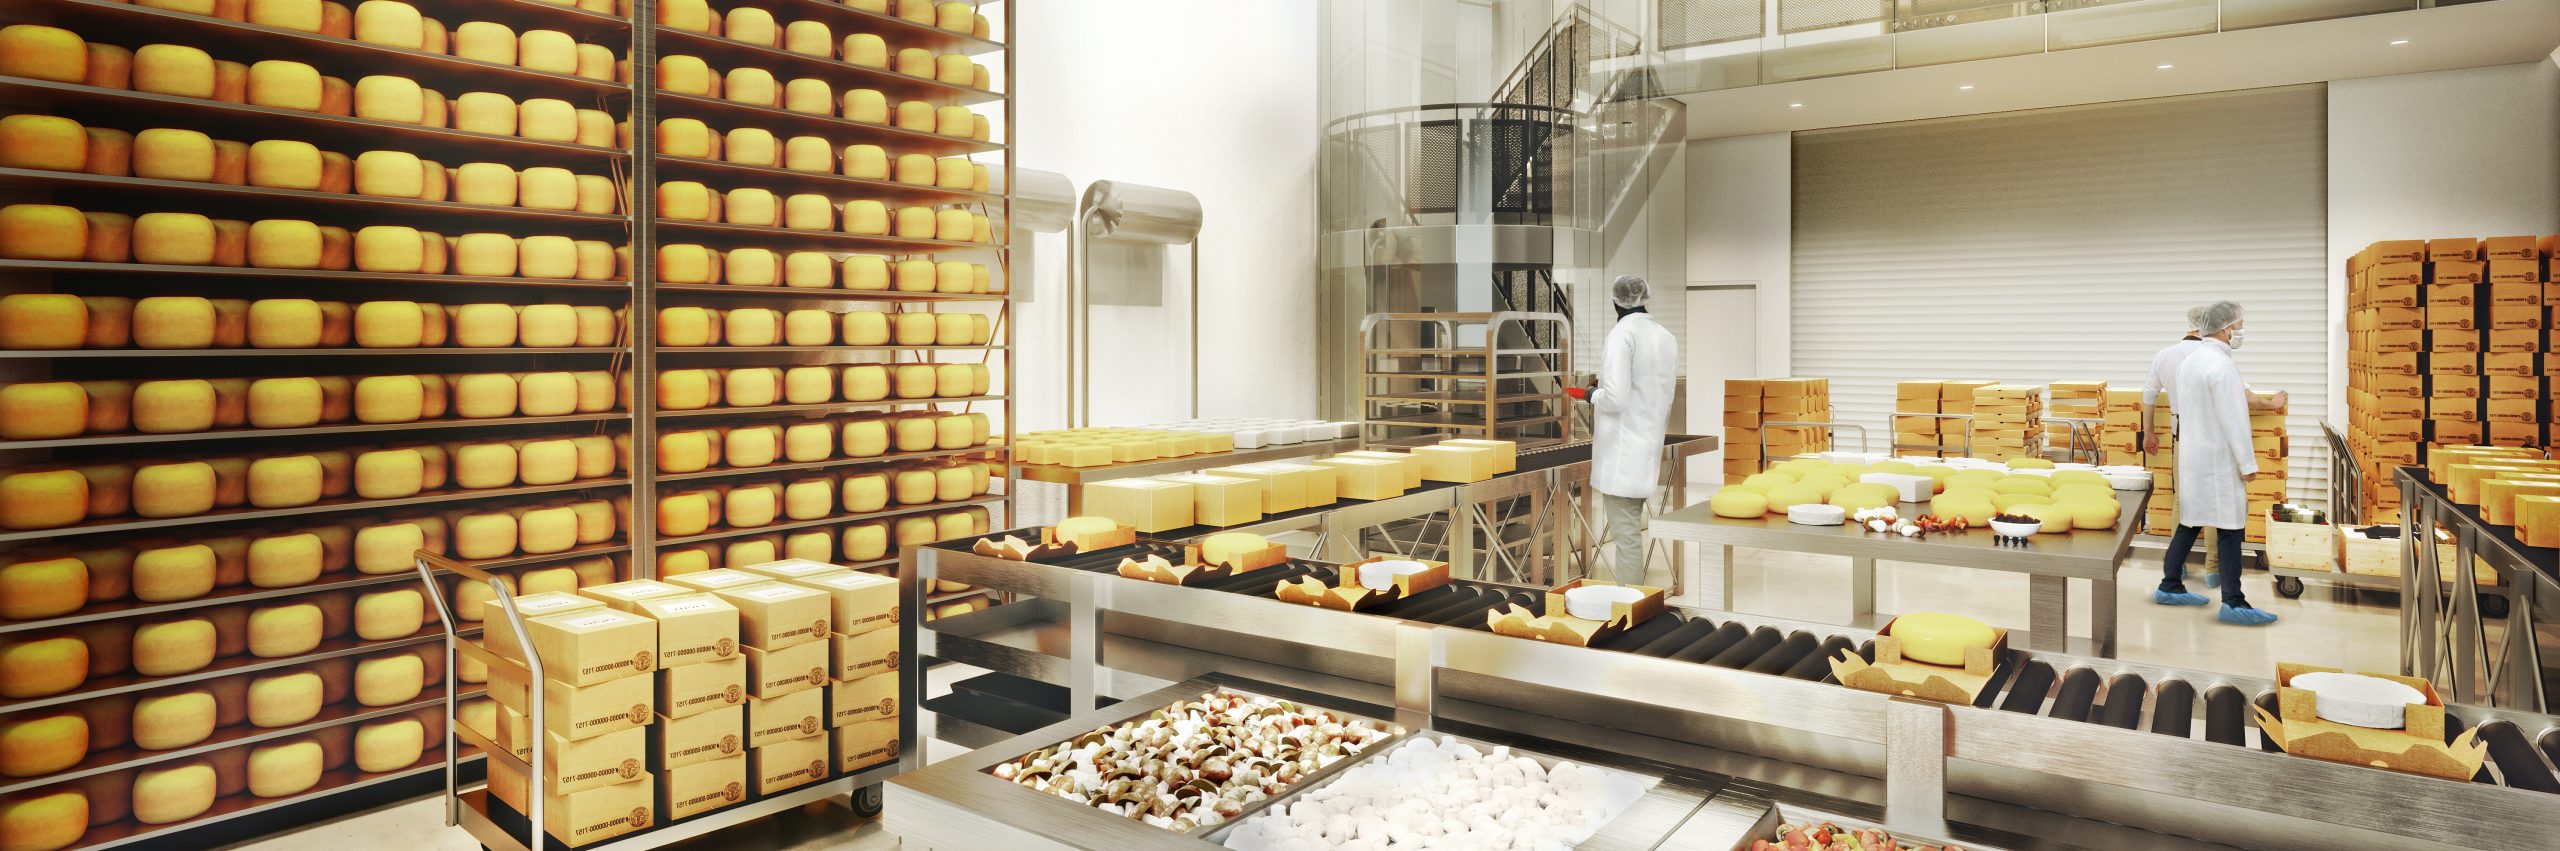 ct-foodchain-food-factory-Cheese-singapore copy